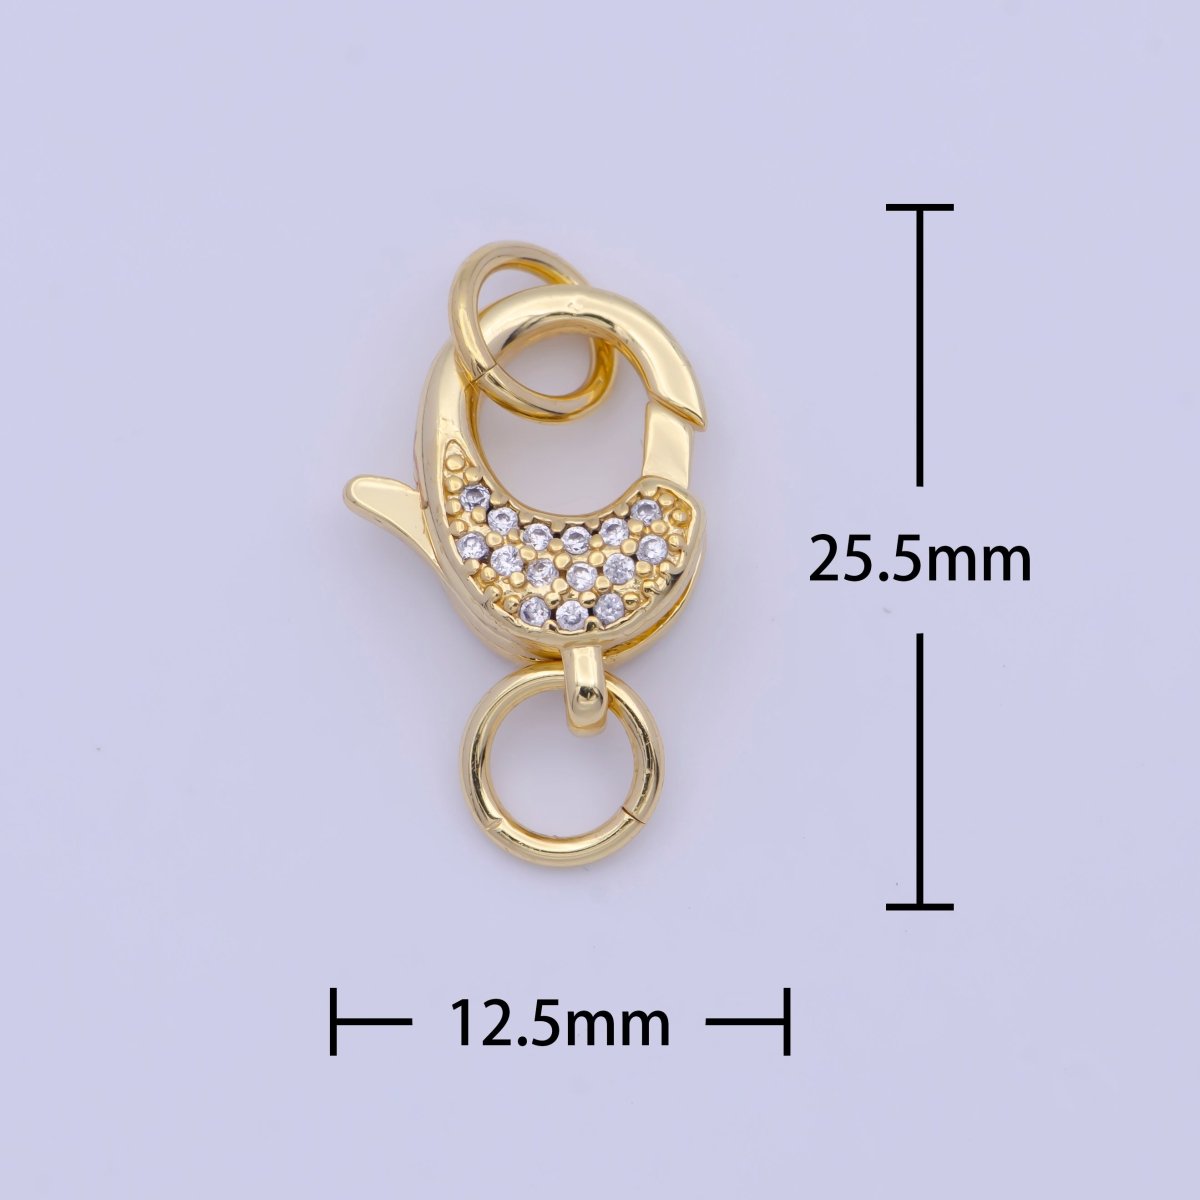 OS 24K Gold Filled Micro Paved Lobster Clasps Closure Cubic Zirconia Jewelry Findings L-923 - DLUXCA